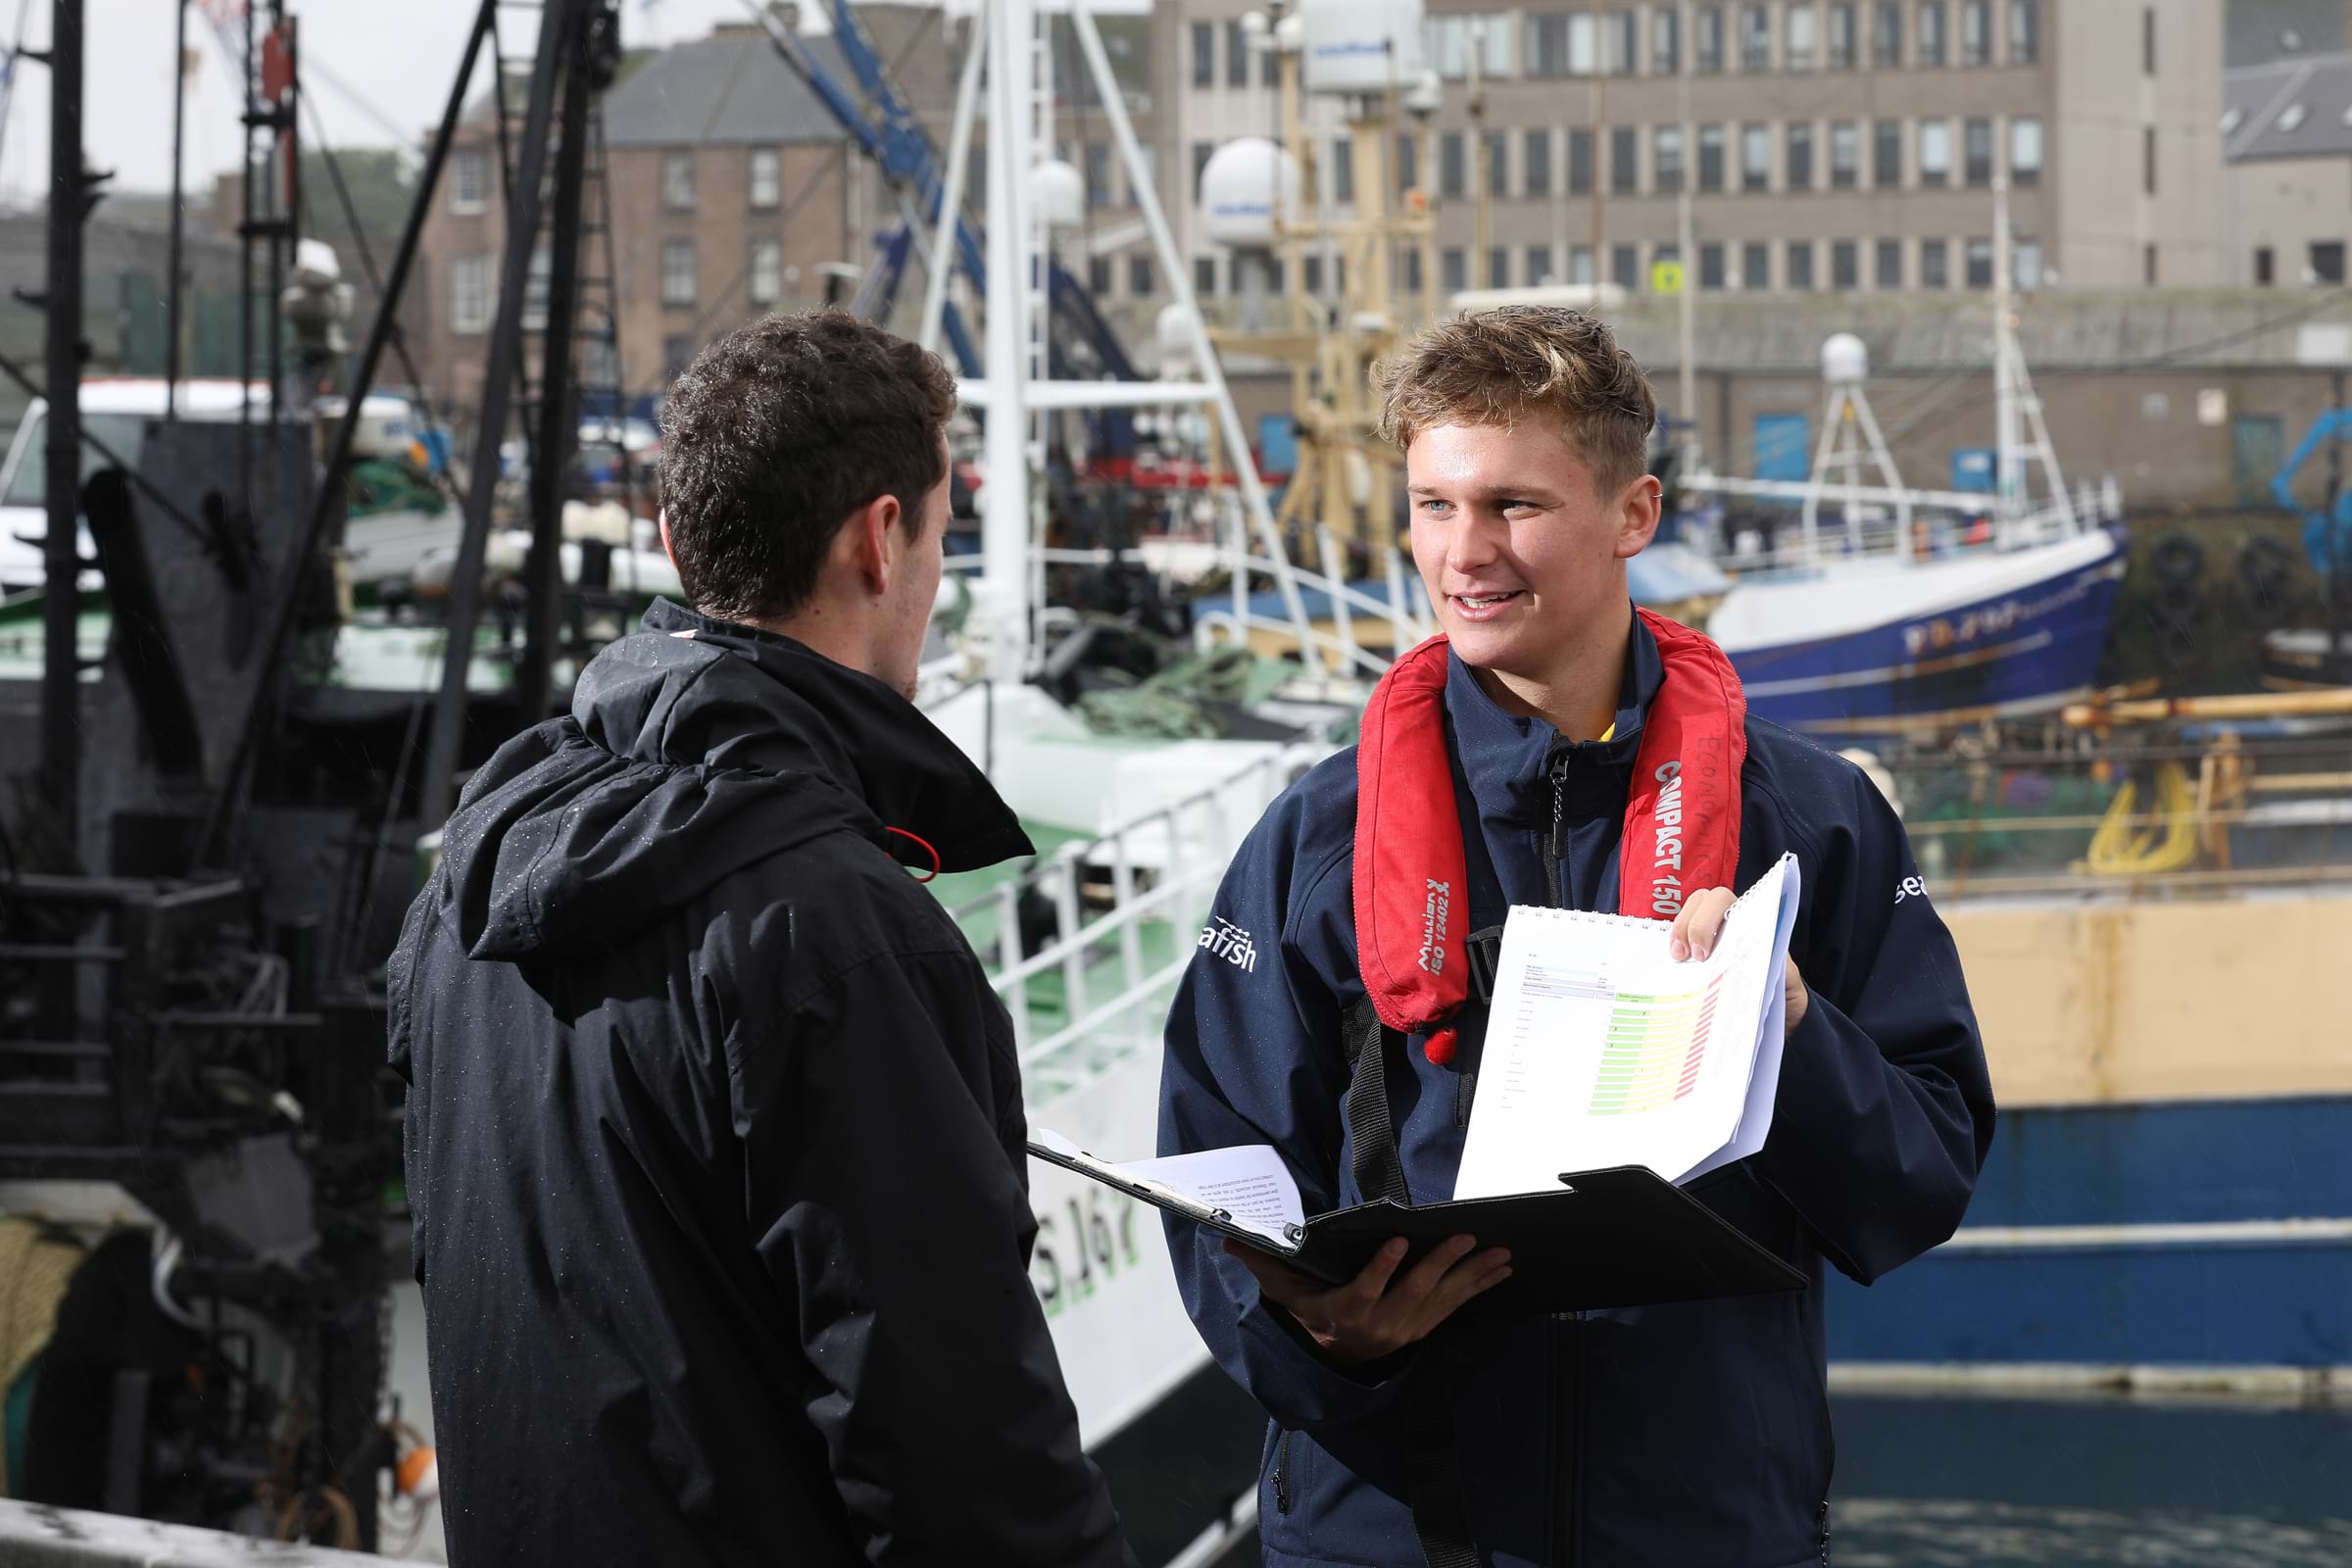 Seafish fleet researcher talking to a fishing vessel owner by the quayside